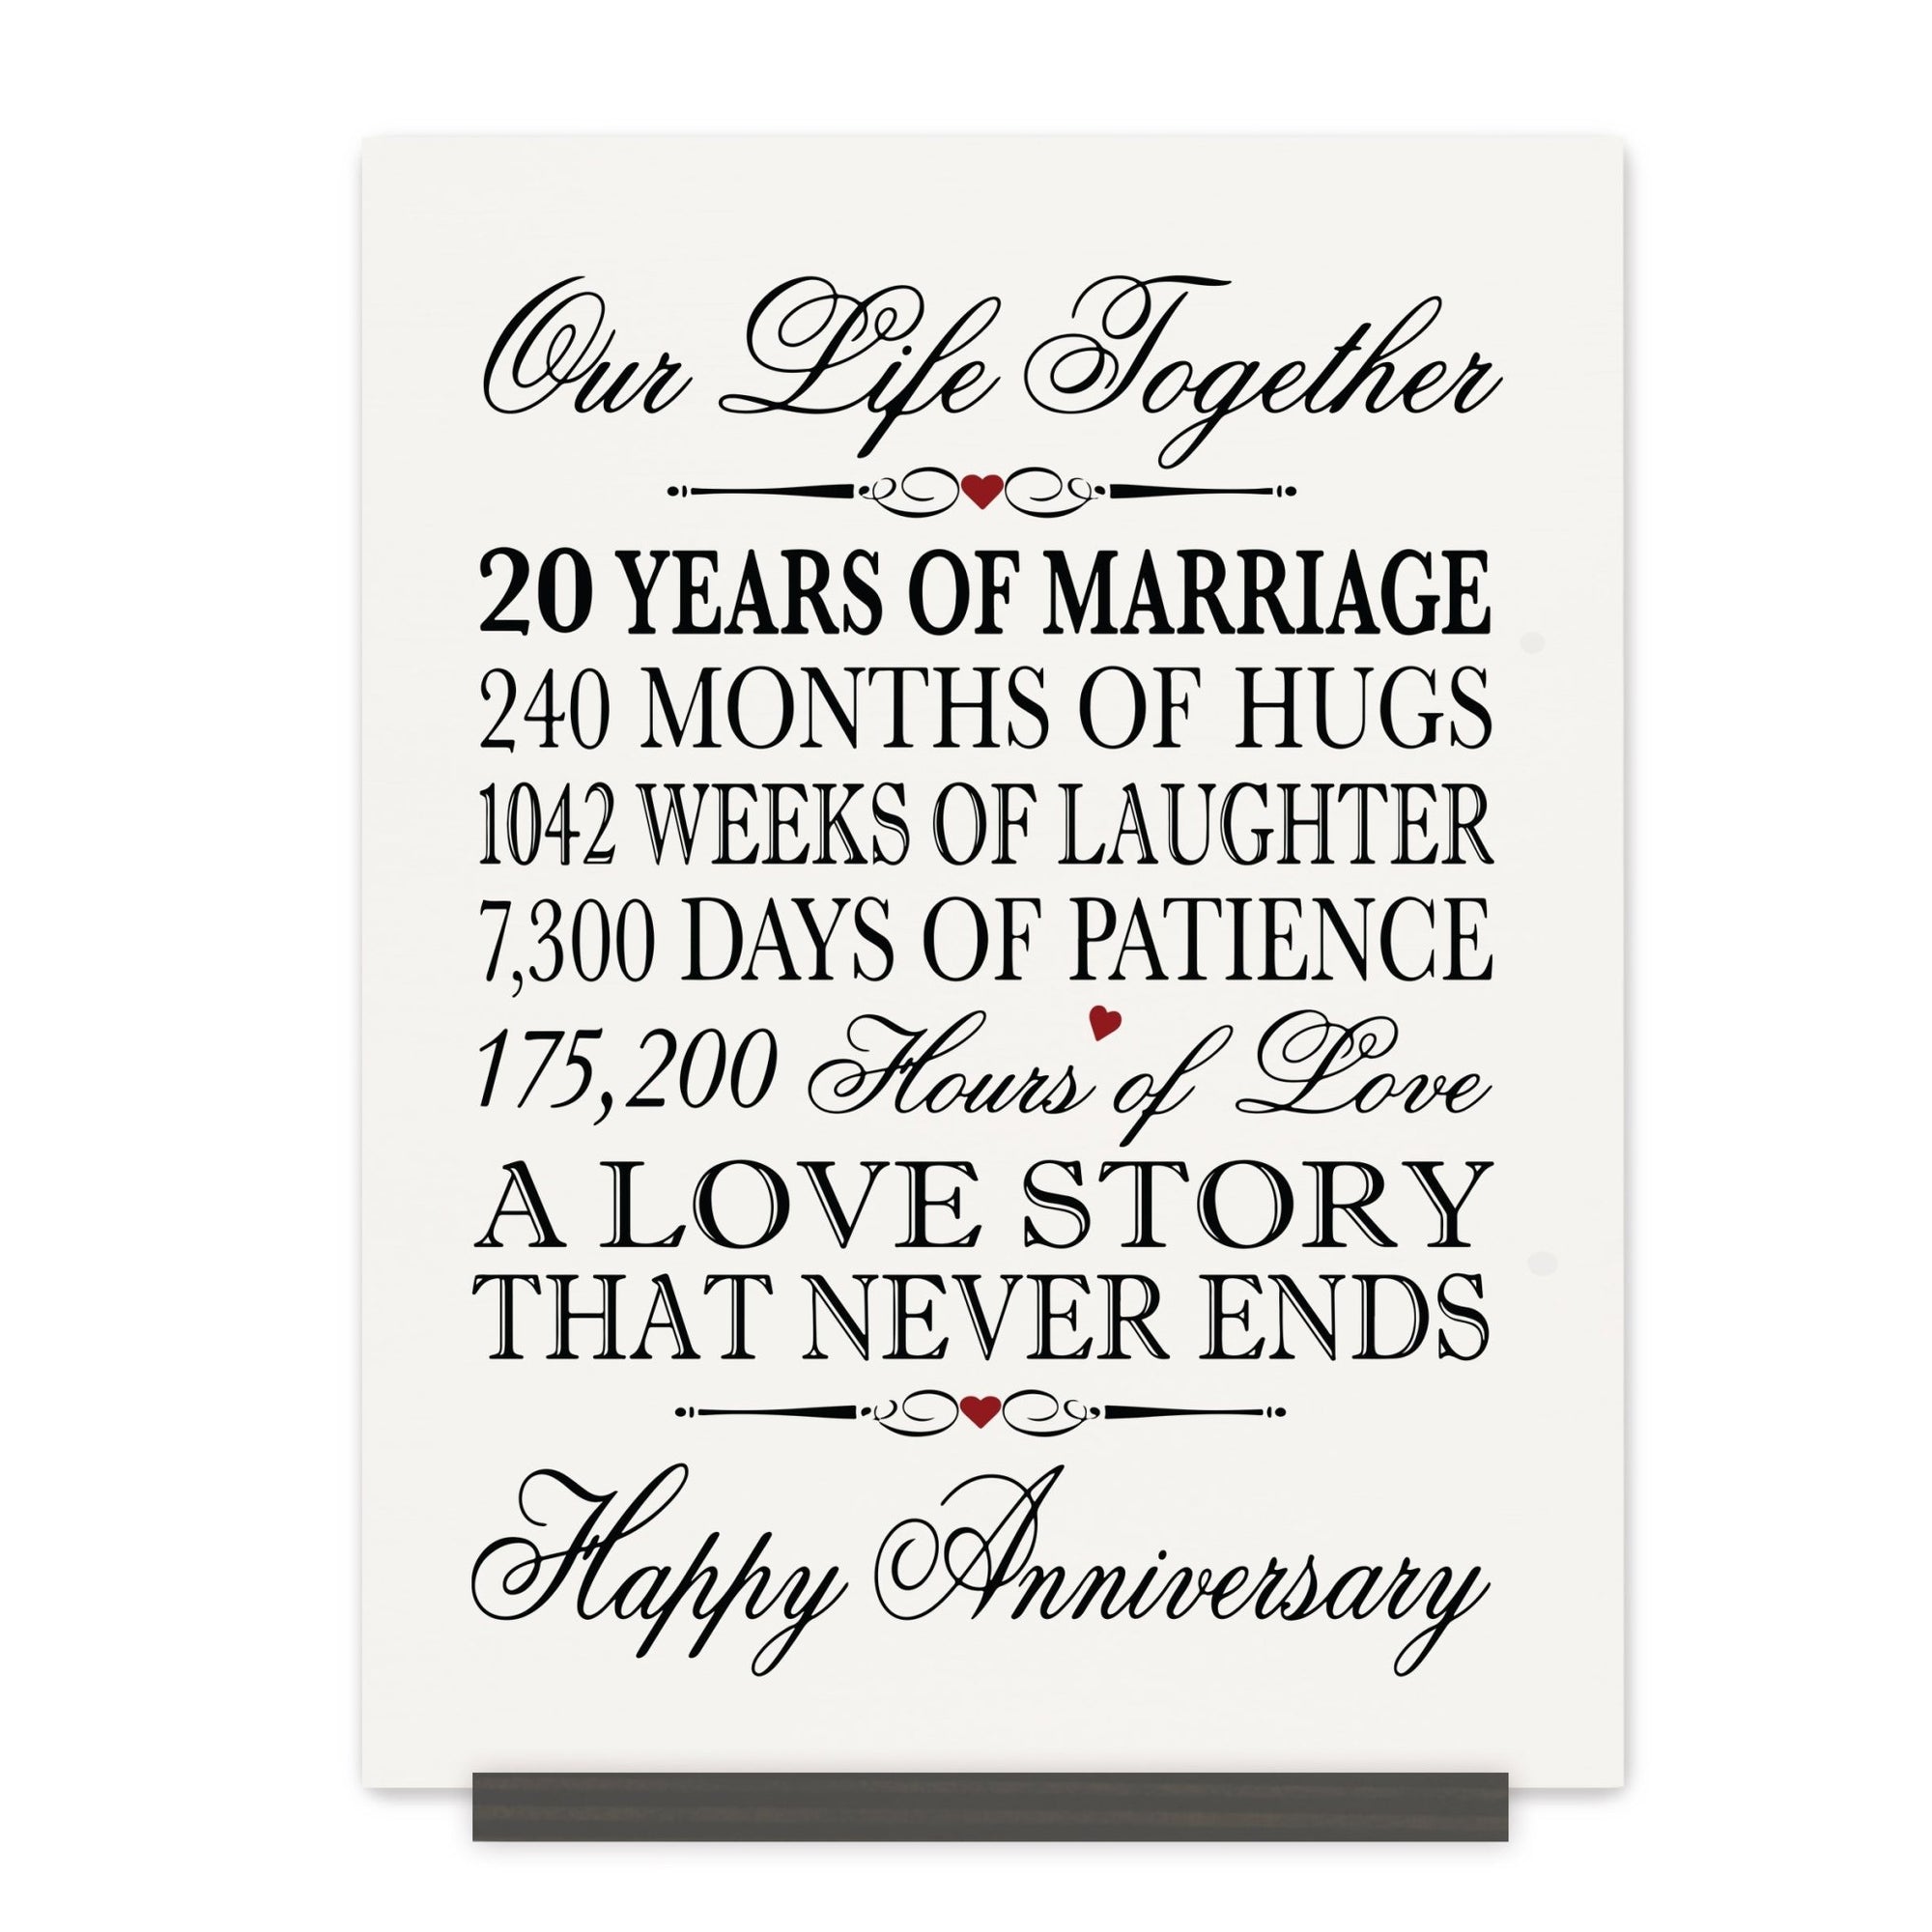 20th Wedding Anniversary Wall Plaque - Our Life Together - LifeSong Milestones